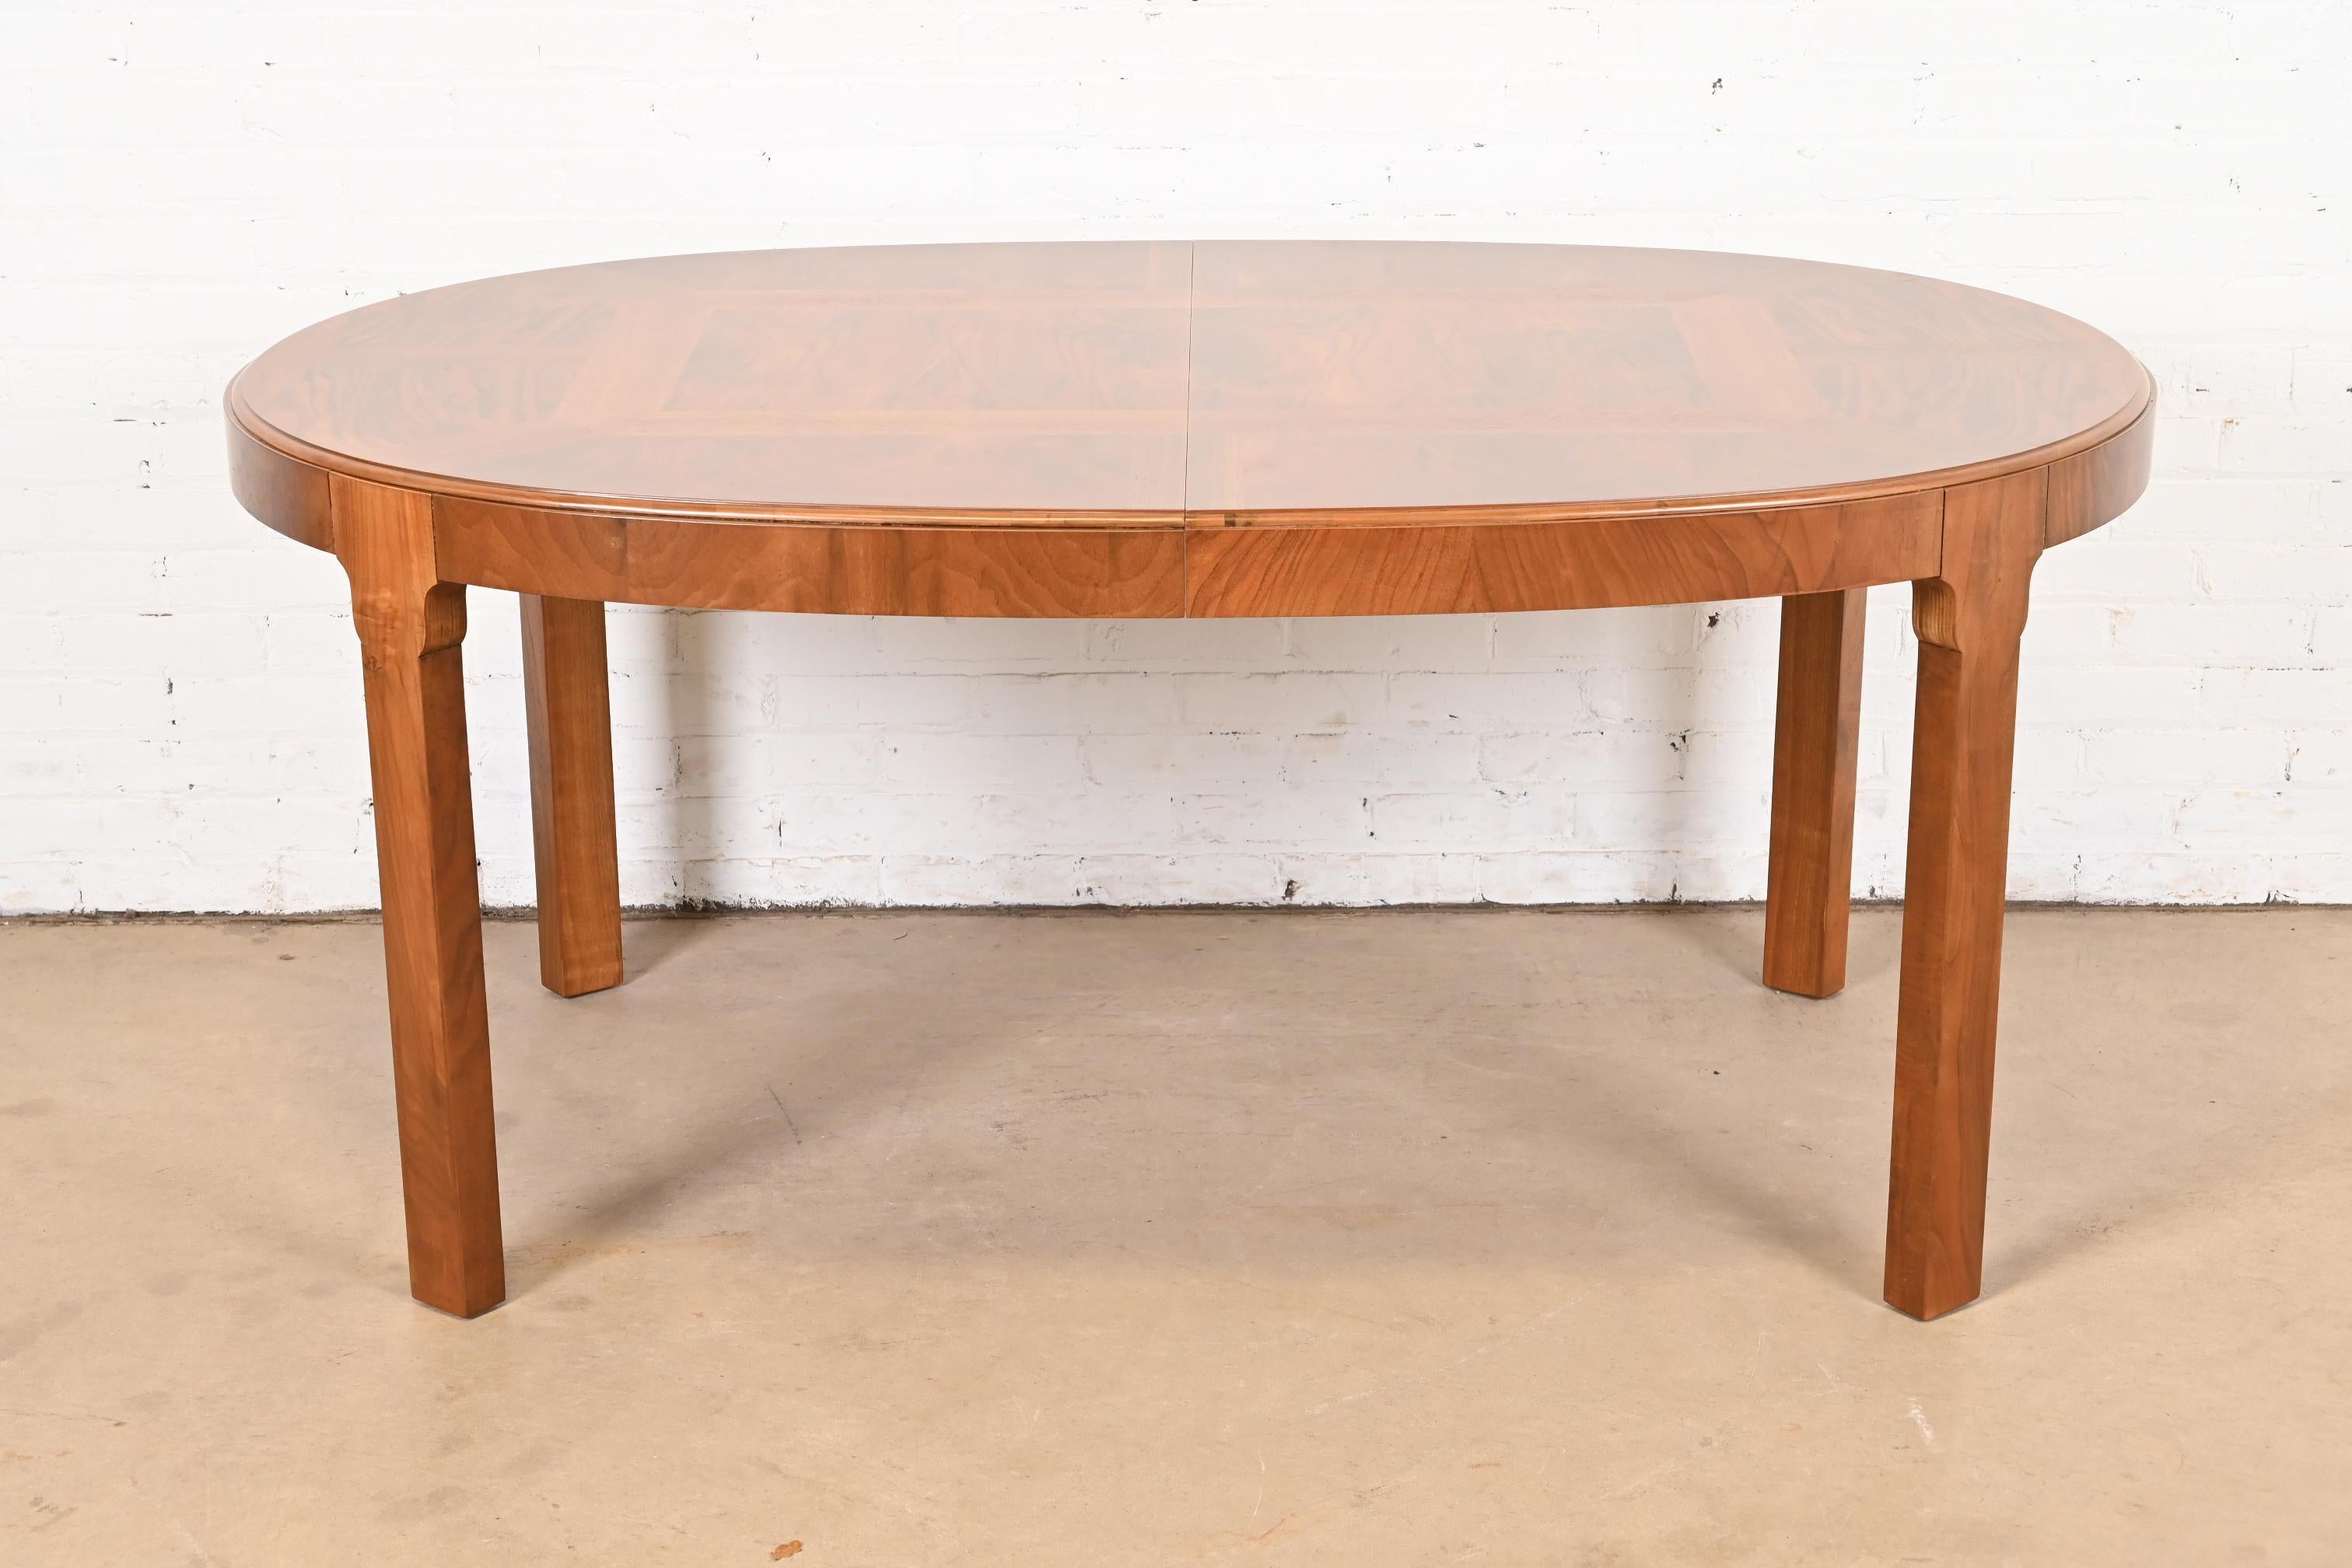 Drexel Heritage Mid-Century Modern Inlaid Burled Walnut Parquetry Dining Table For Sale 6